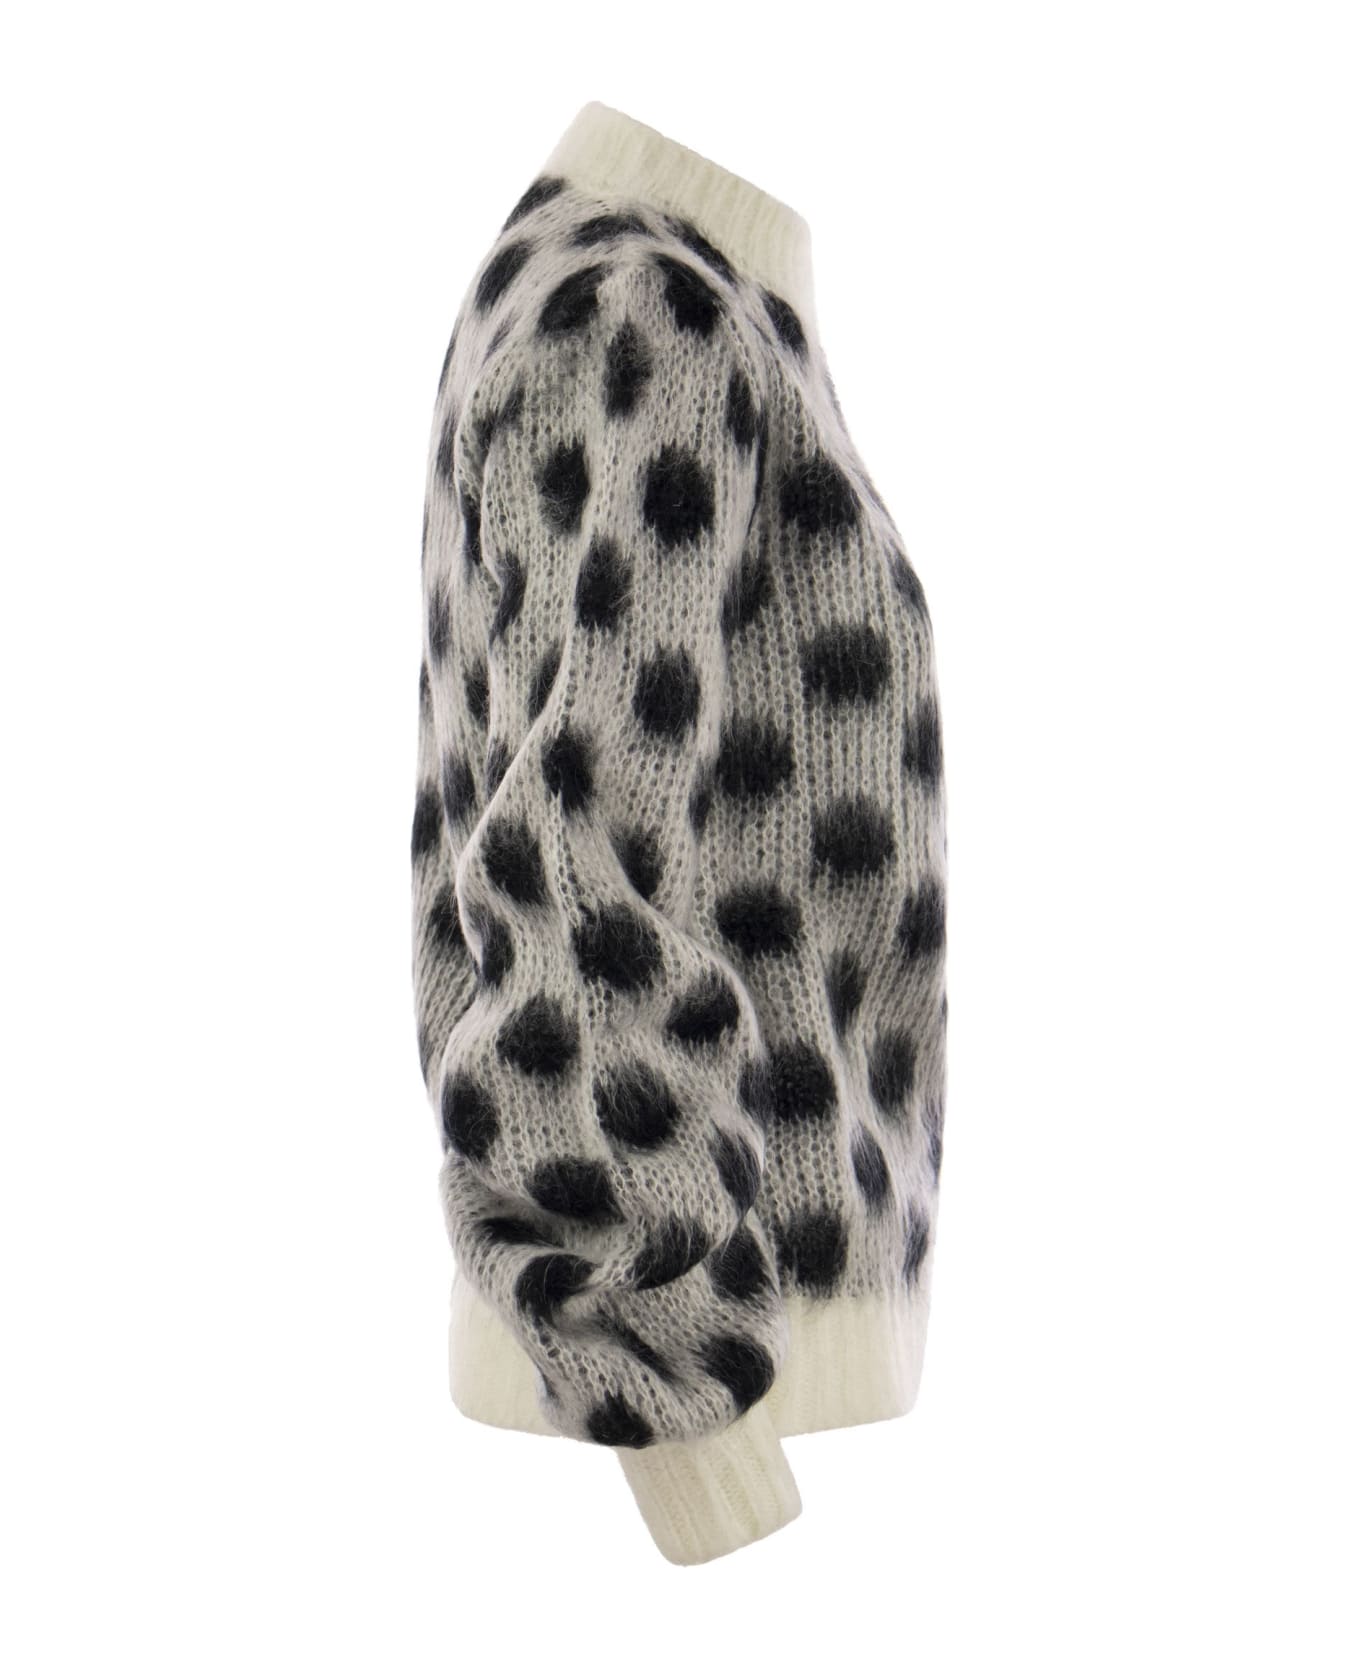 Marni Brushed Mohair Sweater With Polka Dots - White/black